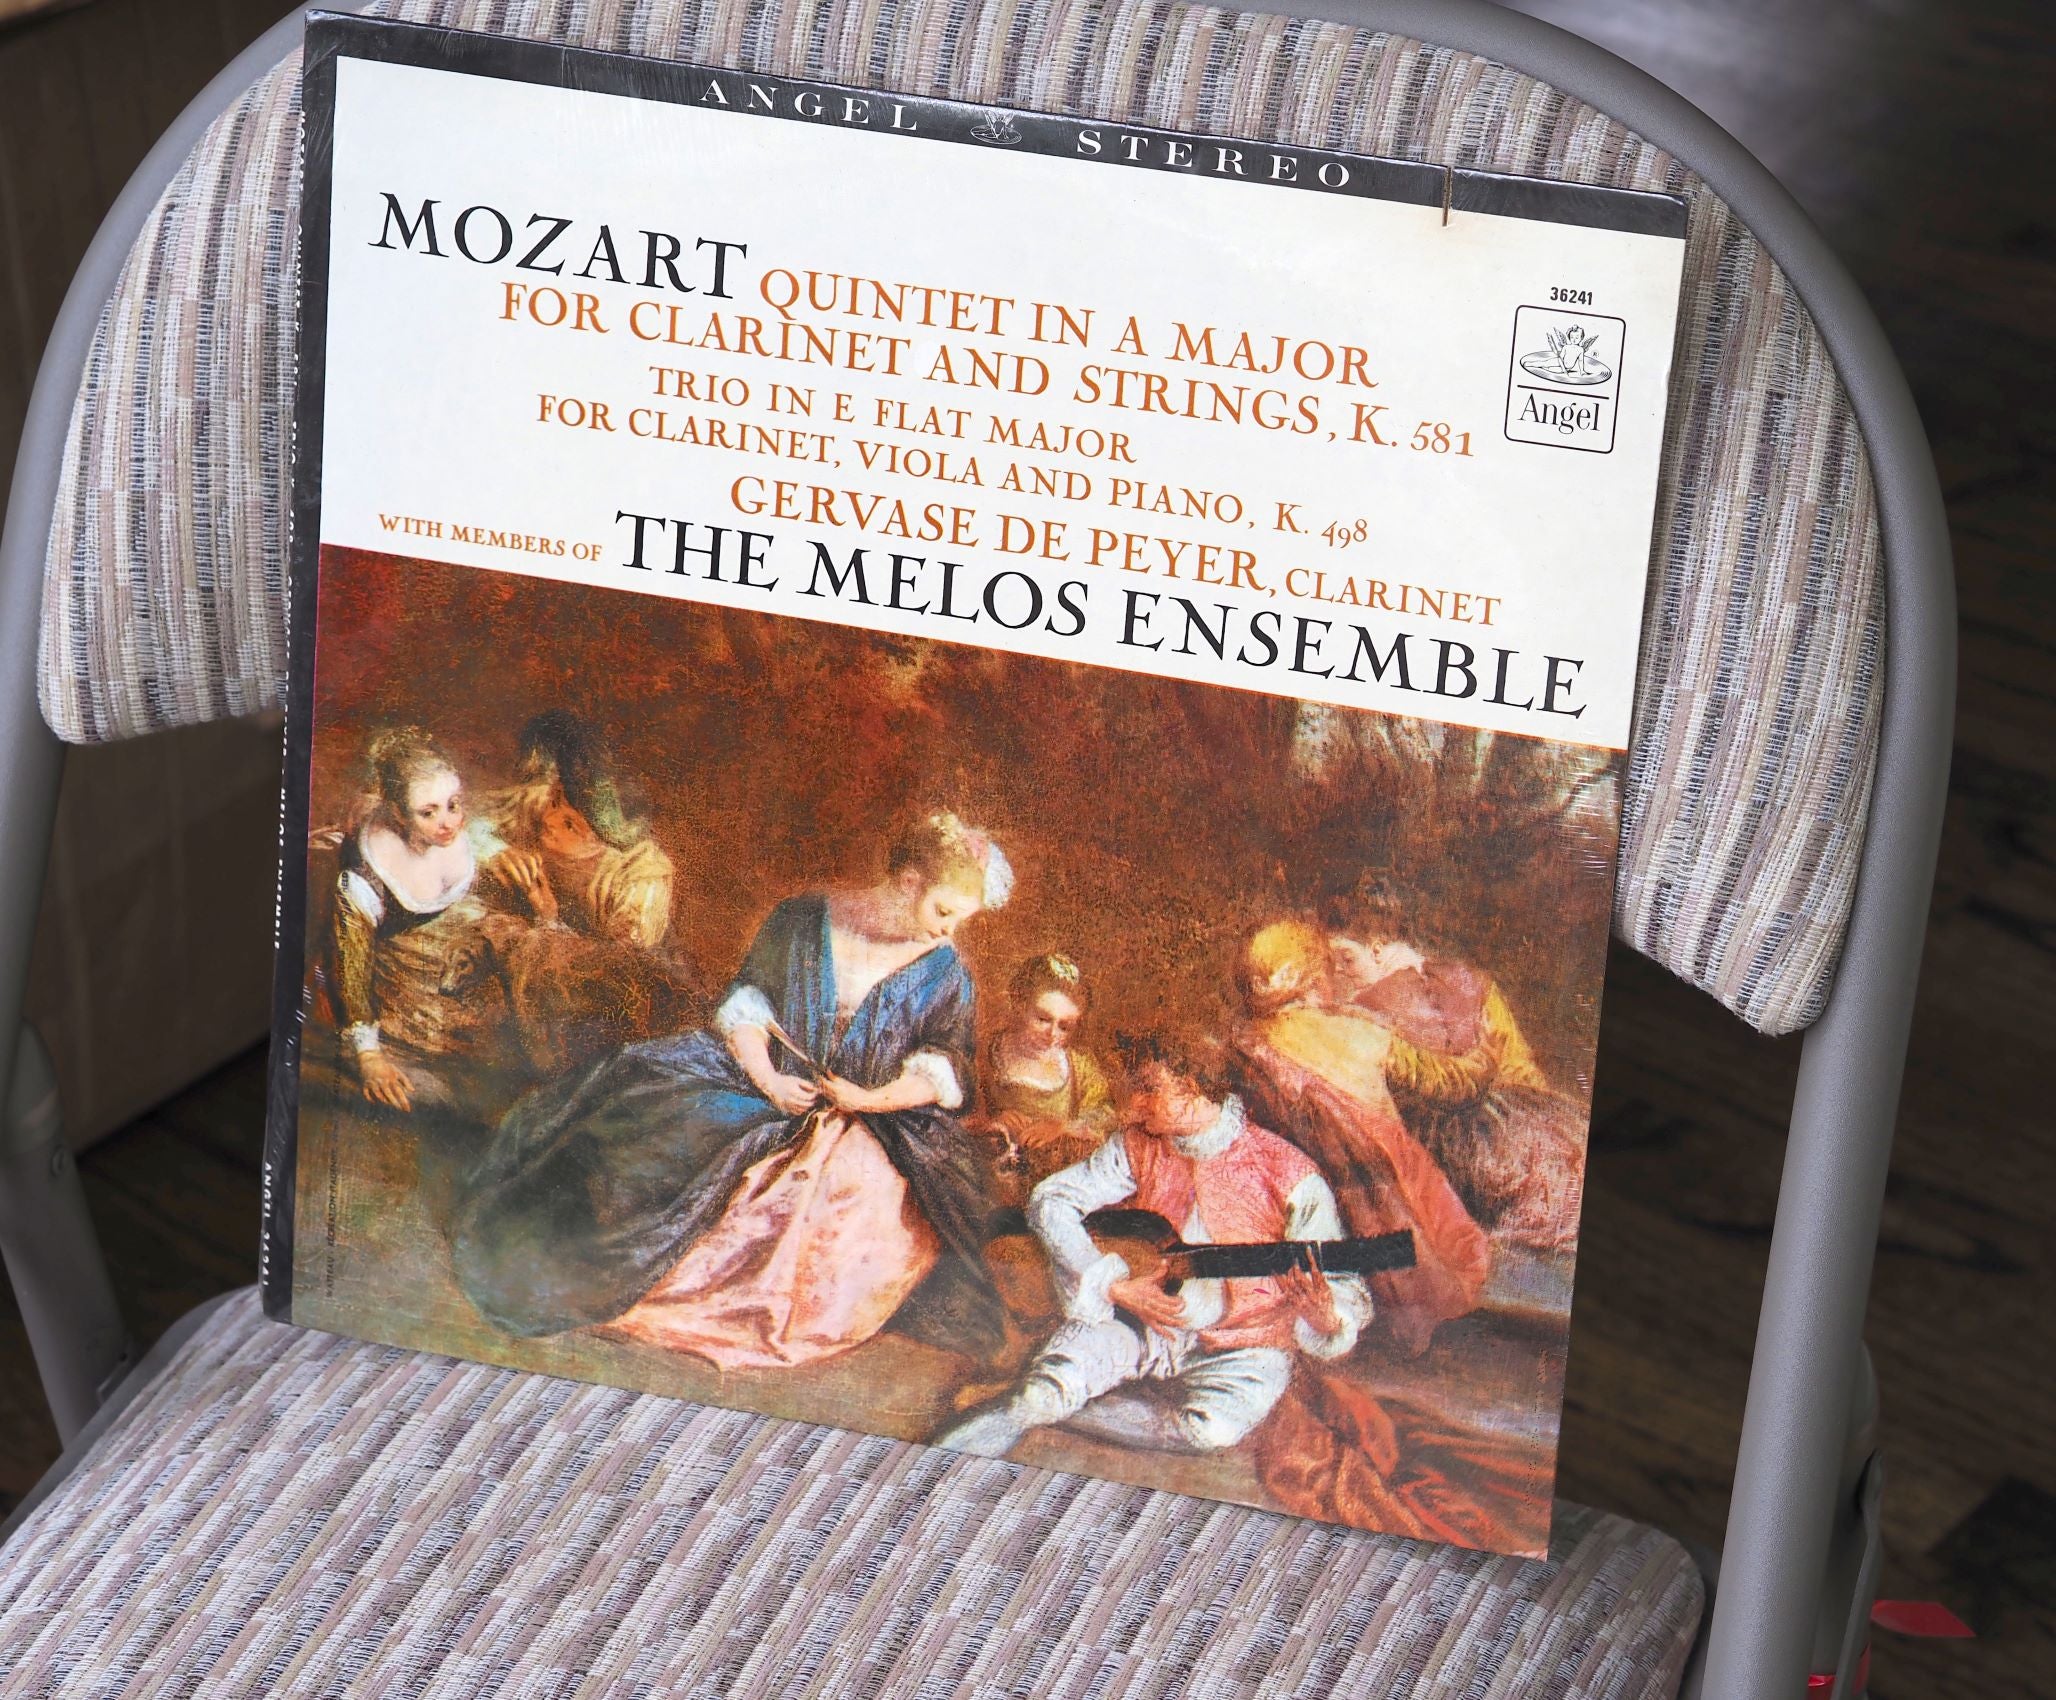 (SEALED) ANG024: Mozart Quintet in A Major k581 and Trio in E Flat Major k498